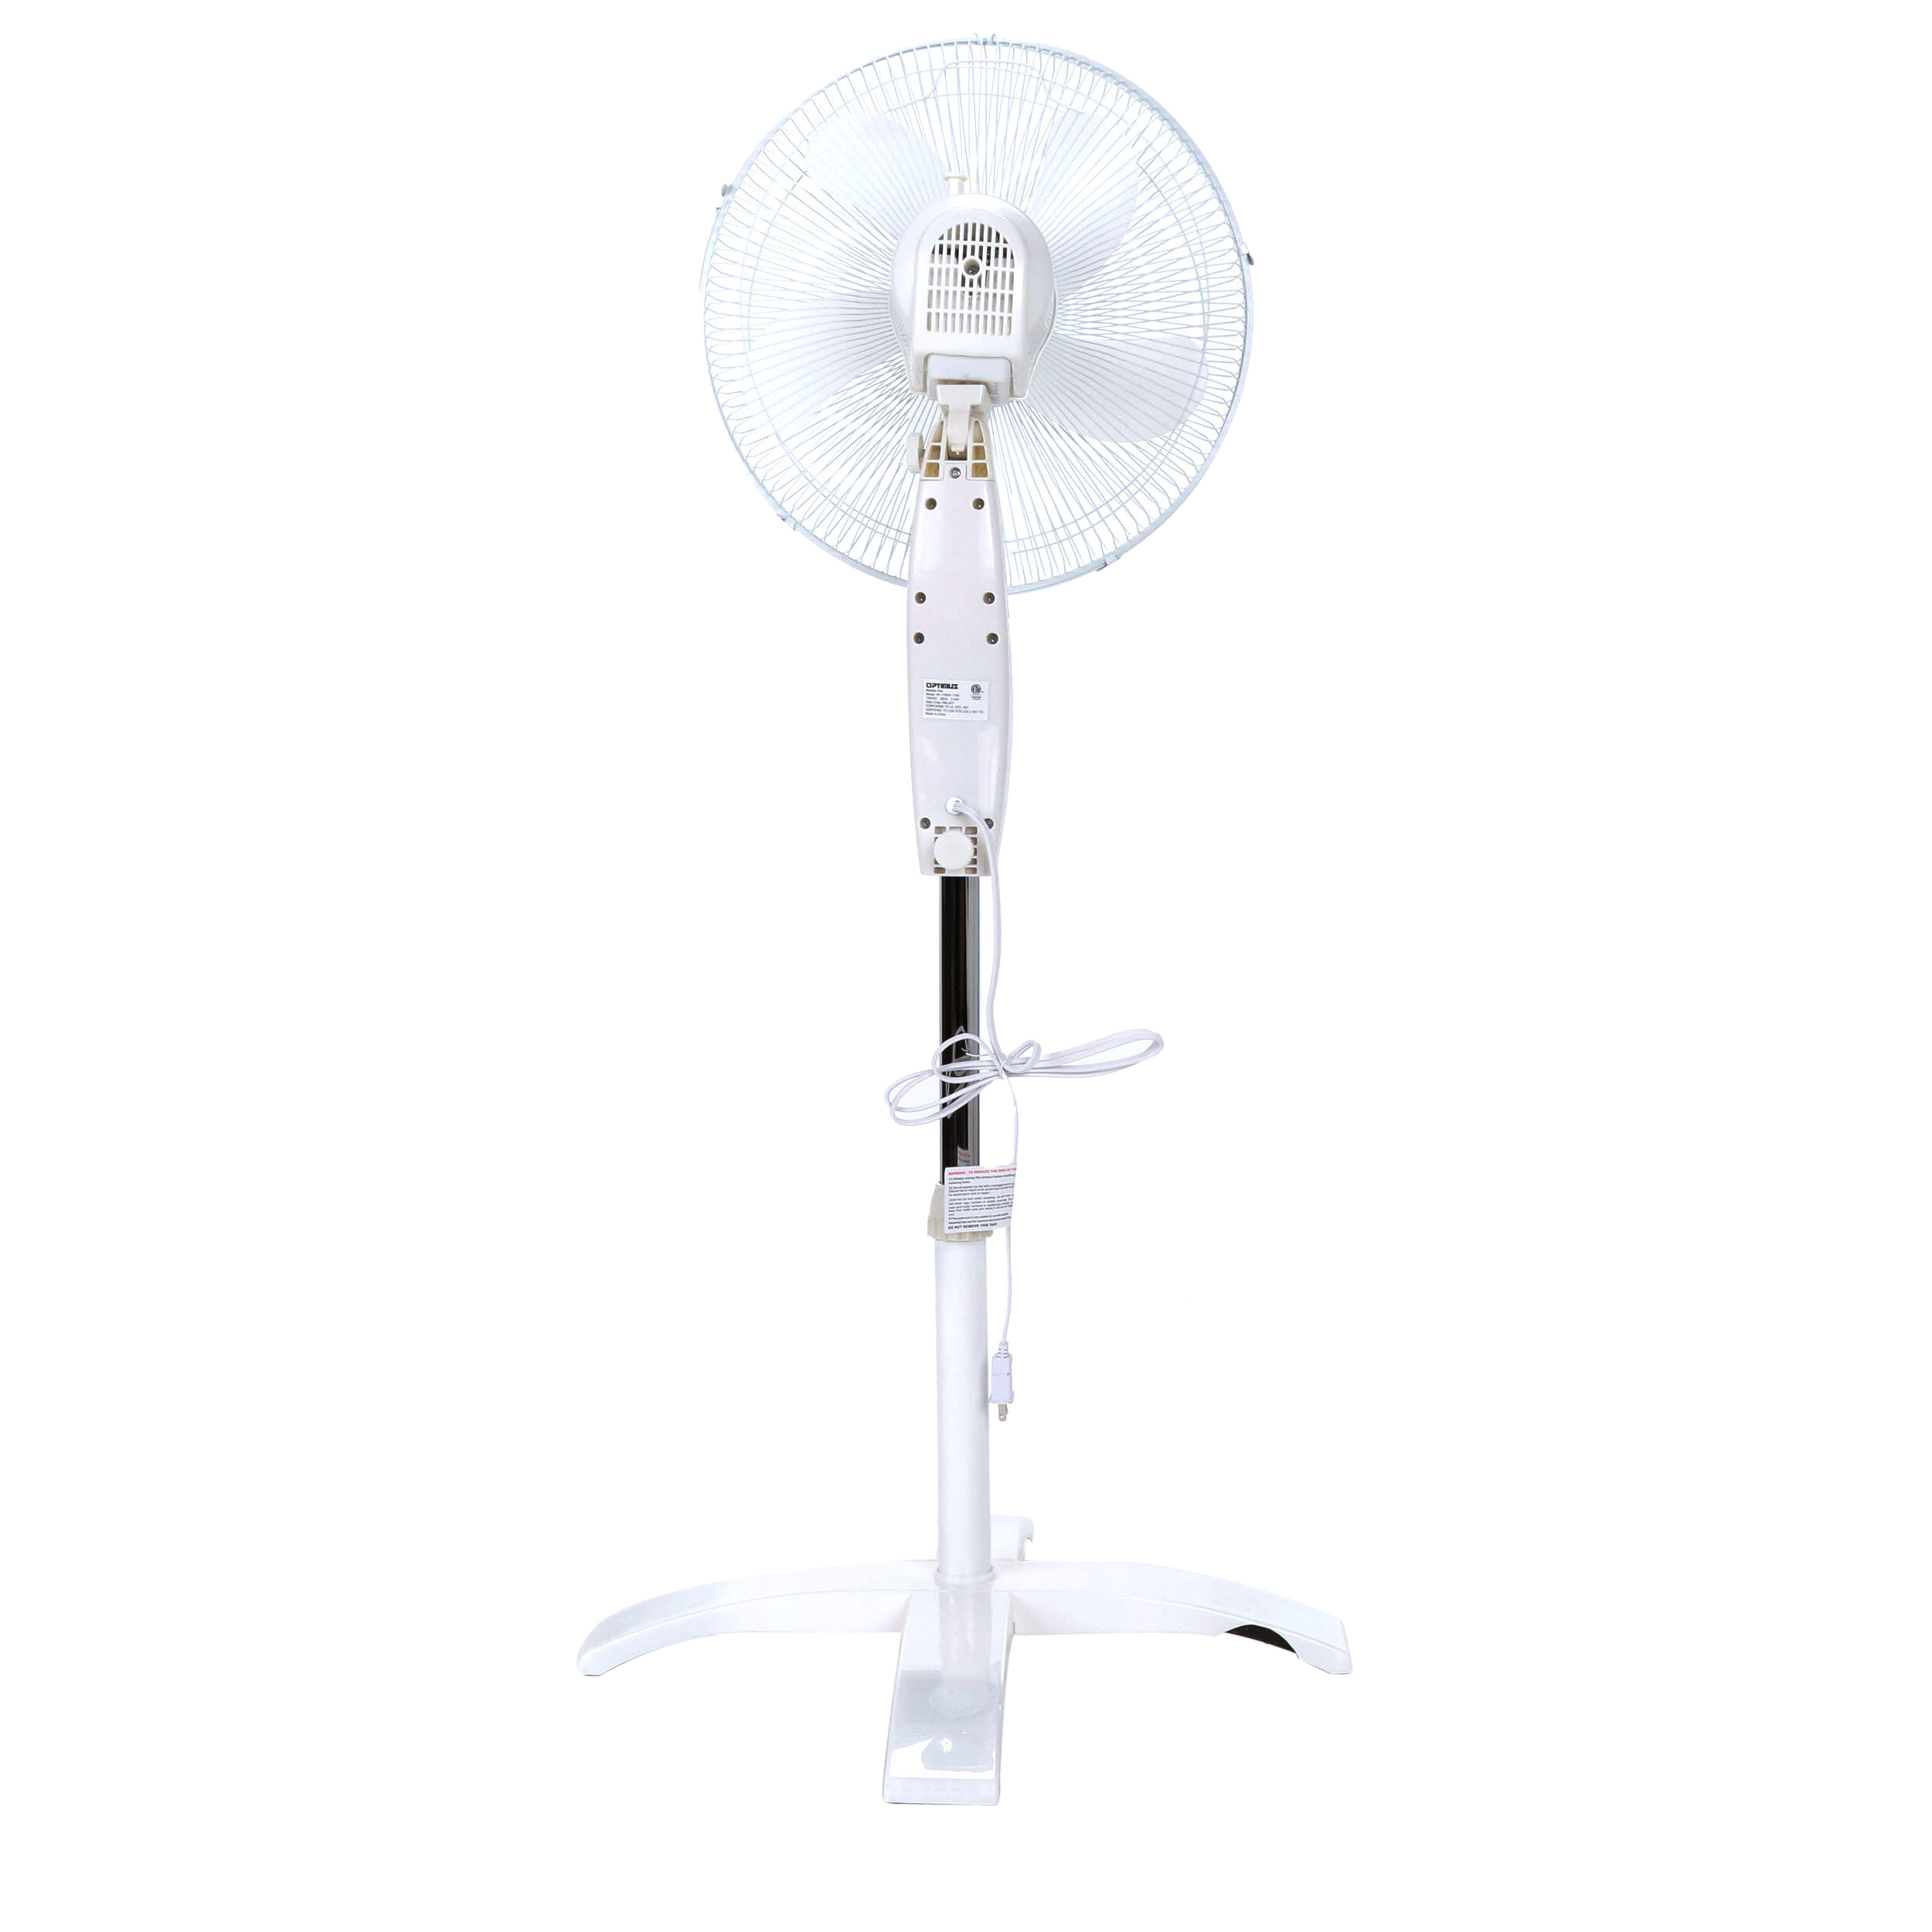 Optimus F-1760 16 inch Oscillating Electric Stand Fan with Remote, White - image 5 of 7